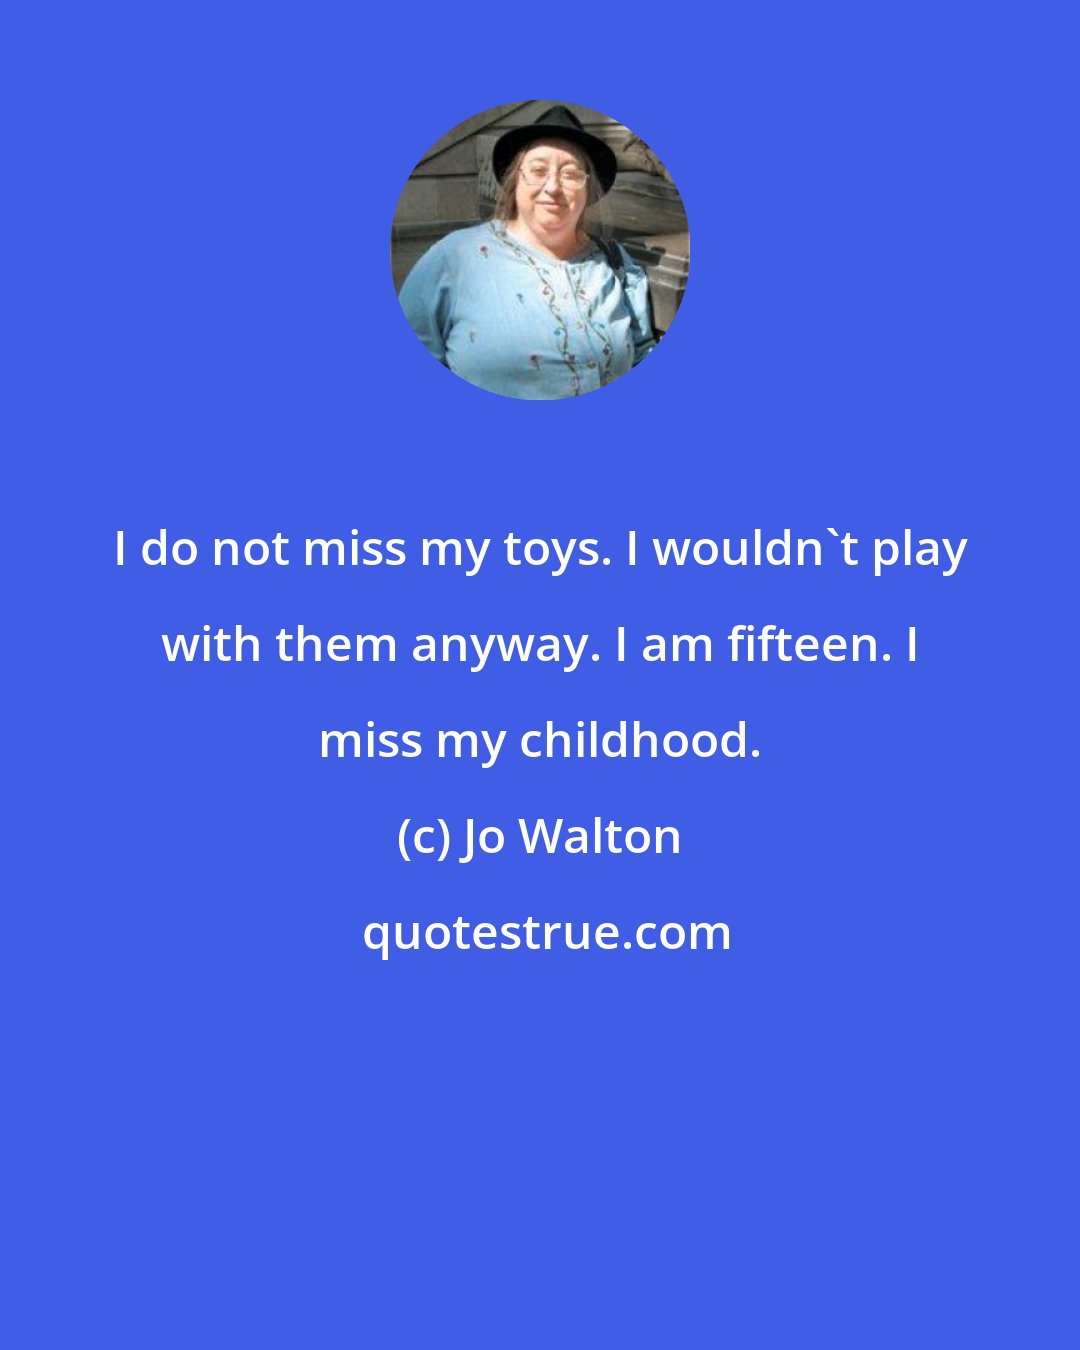 Jo Walton: I do not miss my toys. I wouldn't play with them anyway. I am fifteen. I miss my childhood.